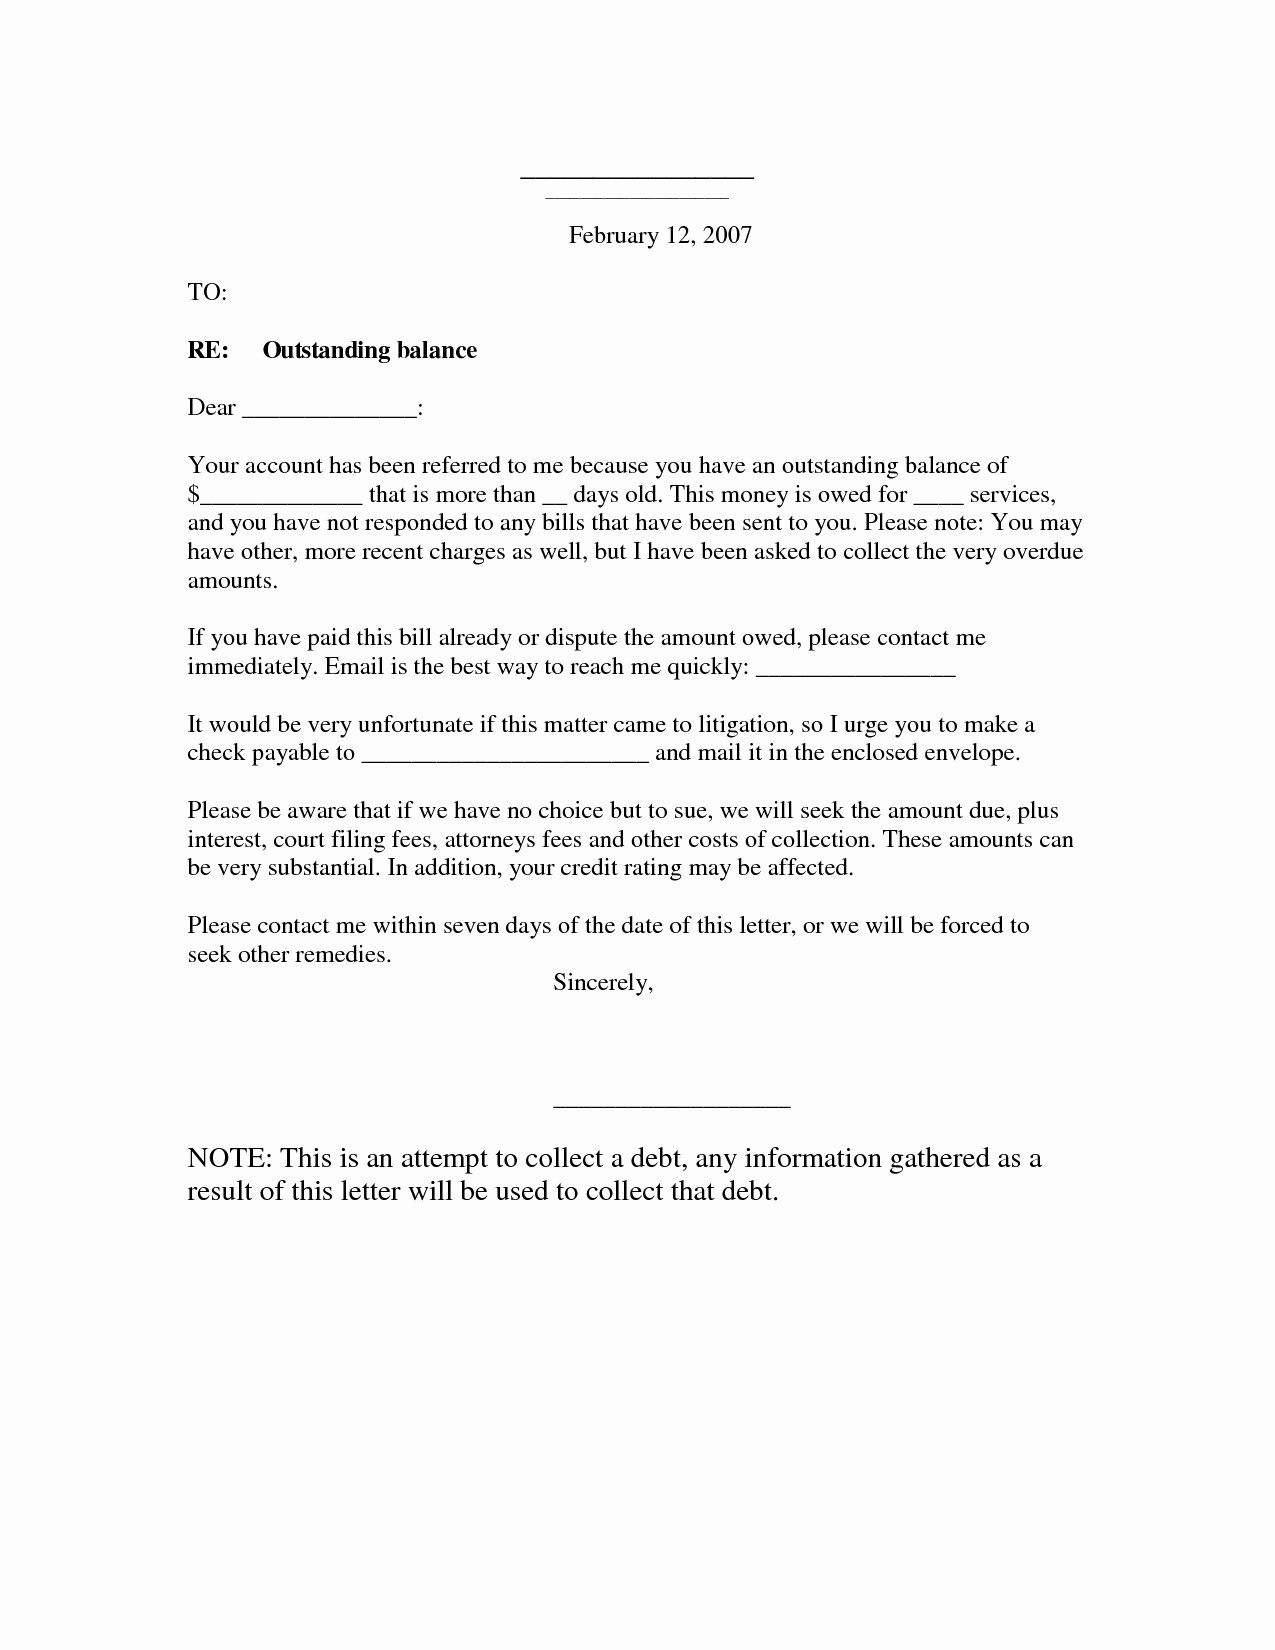 Demand Letter Template for Money Owed Awesome Demand Letter Template for Money Owed Samples